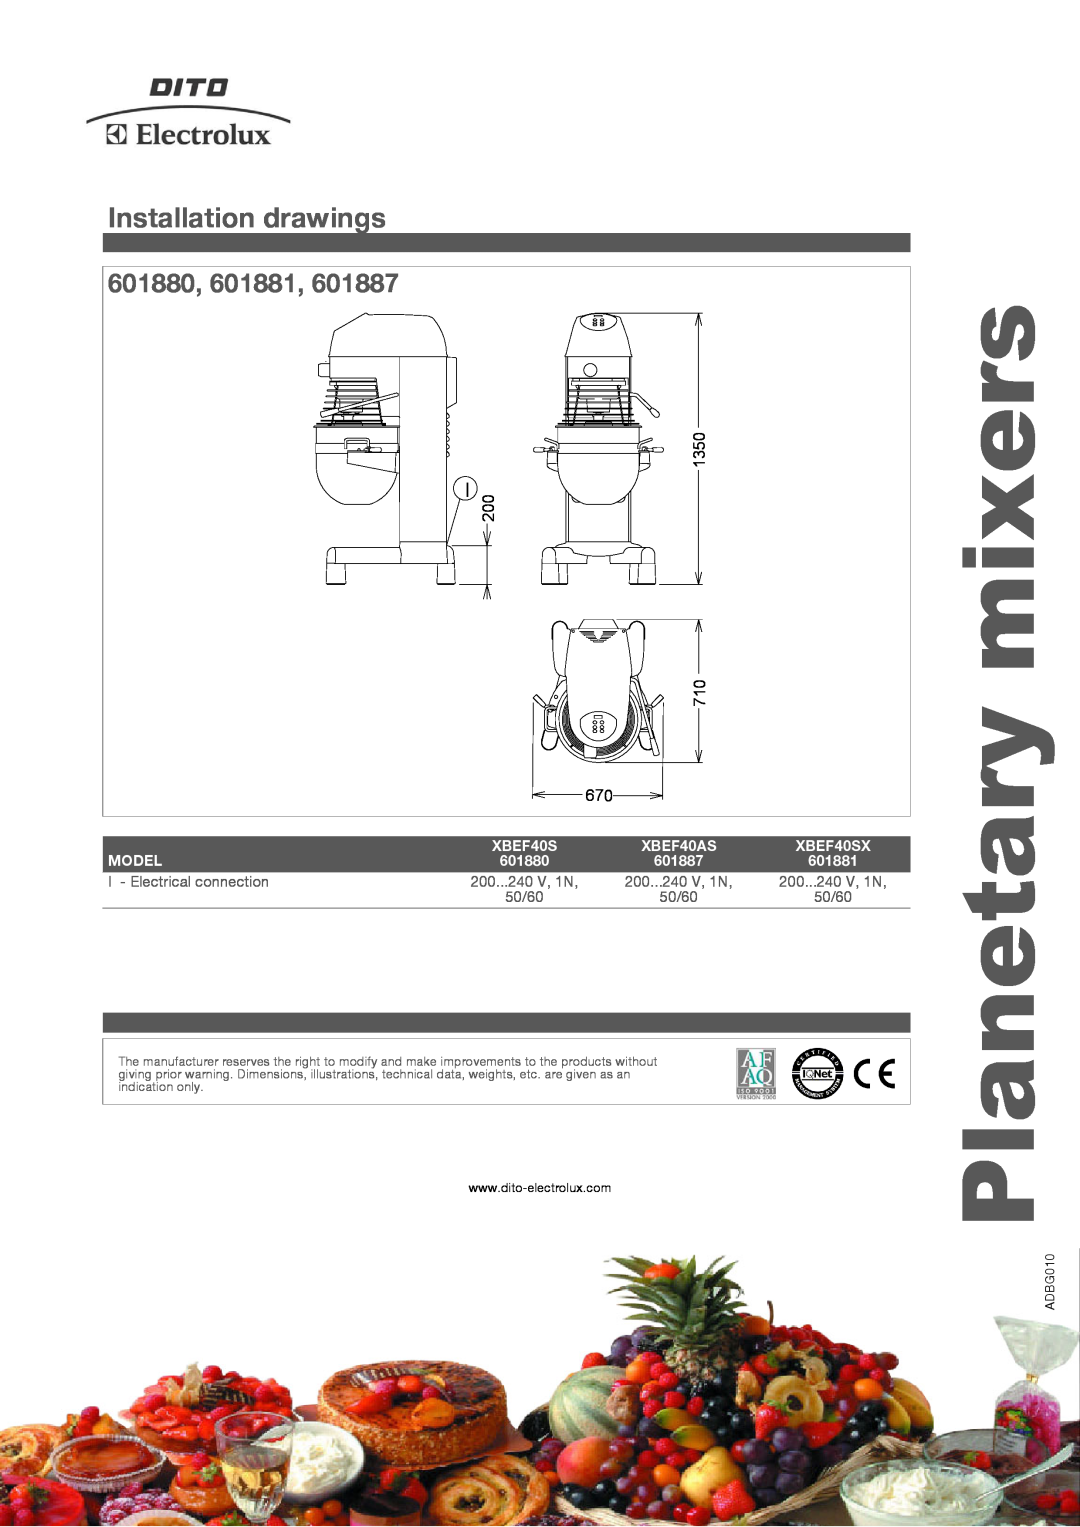 Electrolux 601887, XBEF40AS, XBEF40SX manual Installation drawings, 601880, 601881, mixers, Planetary, 1350 